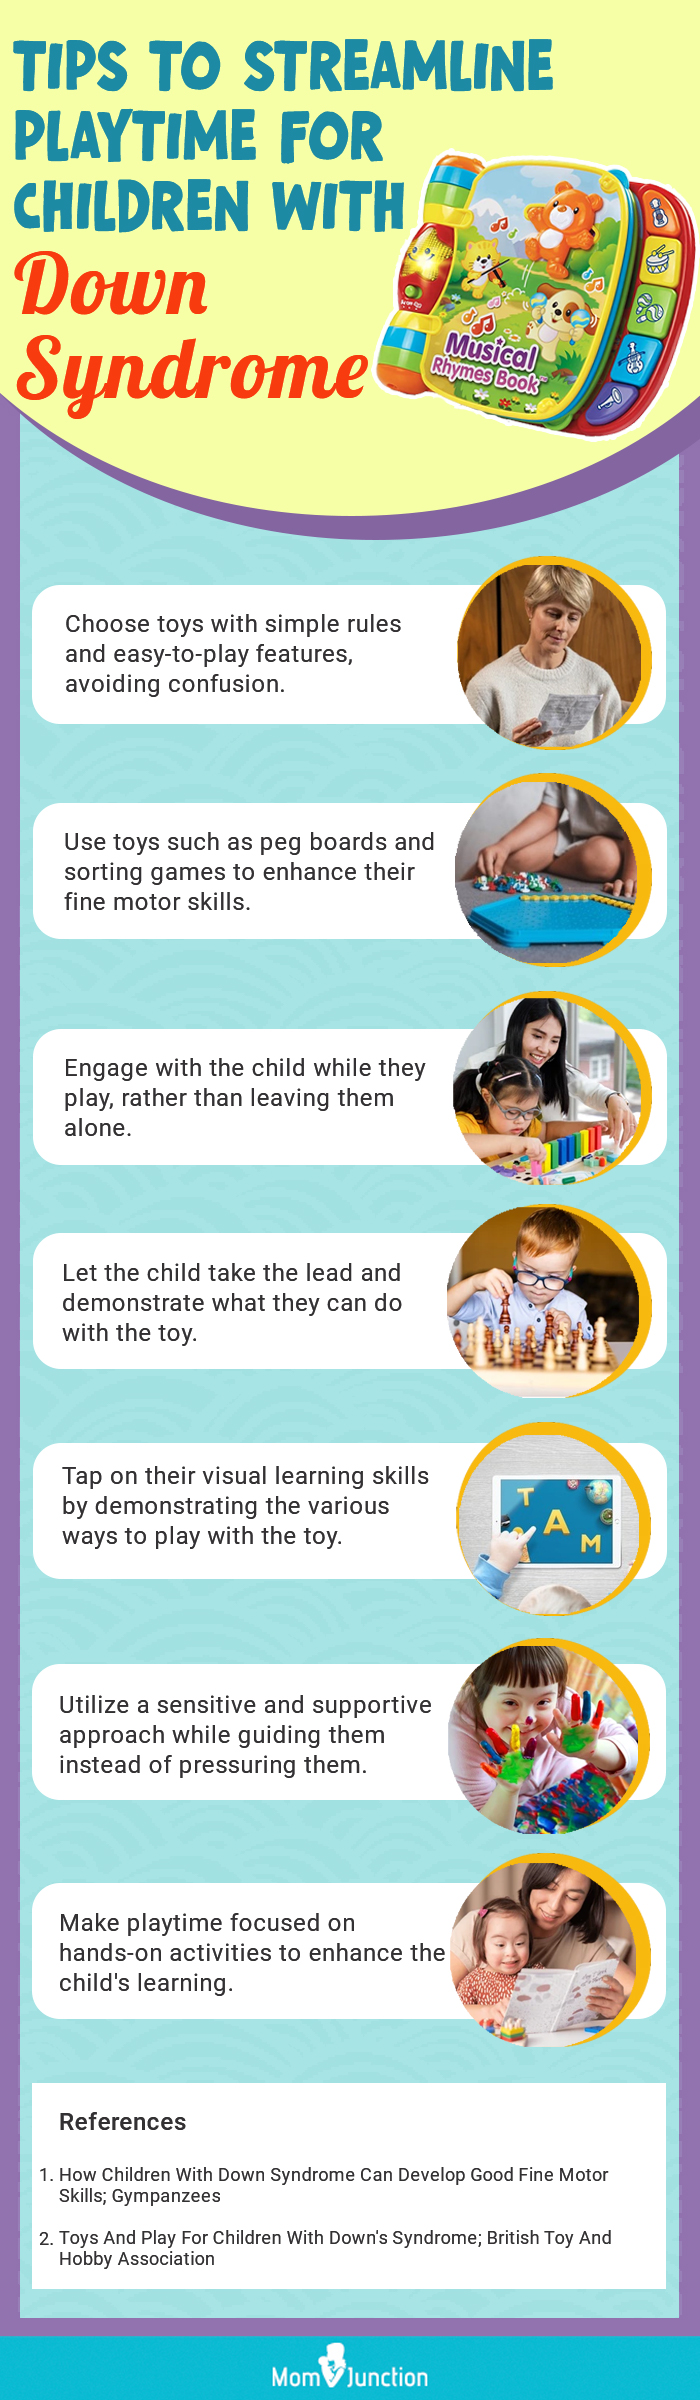 Tips To Streamline Playtime For Children With Down Syndrome (infographic)